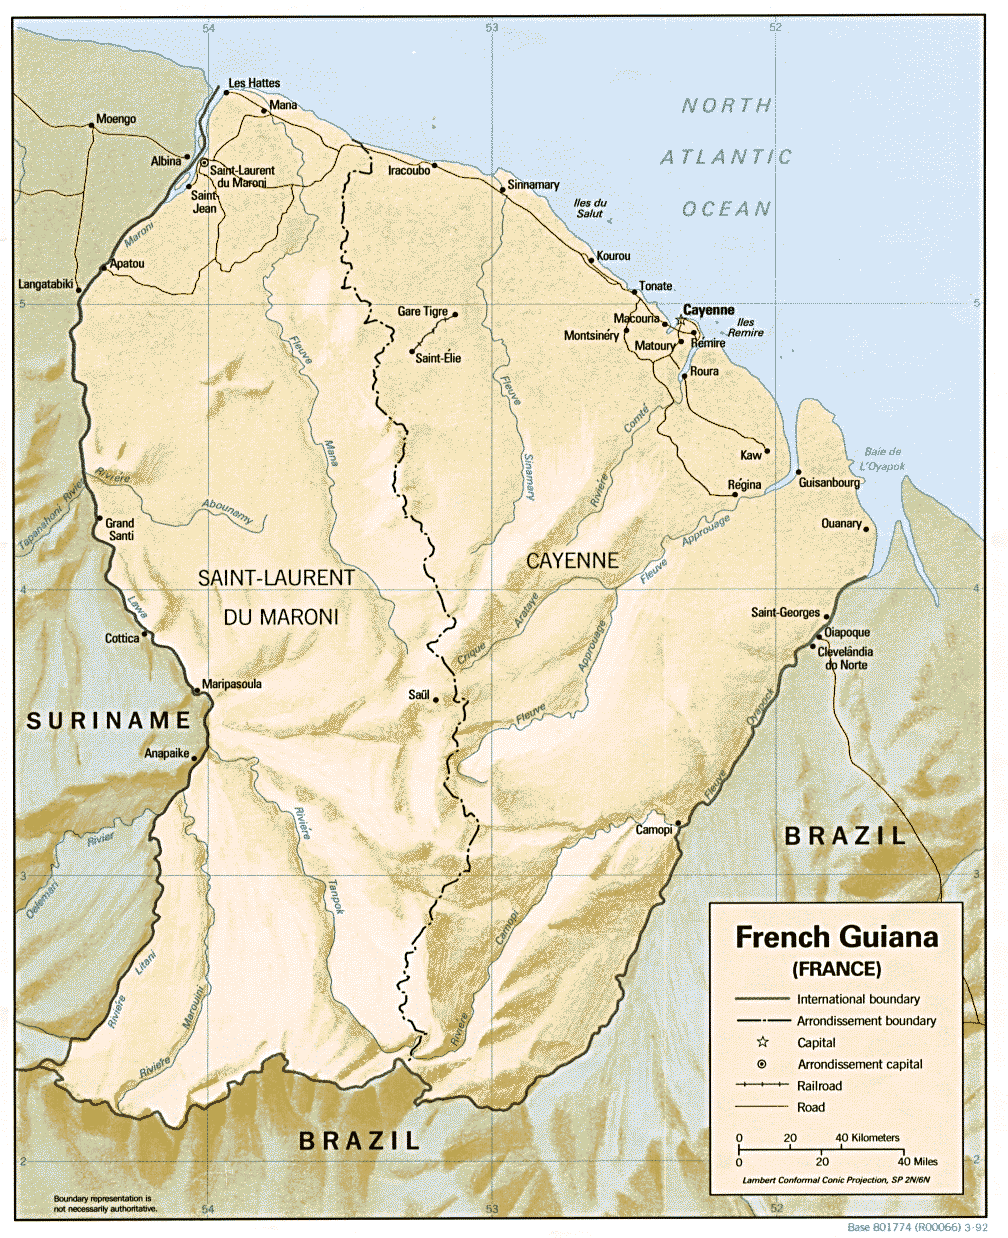 Guyane, (French Guiana Shaded Relief Map), France